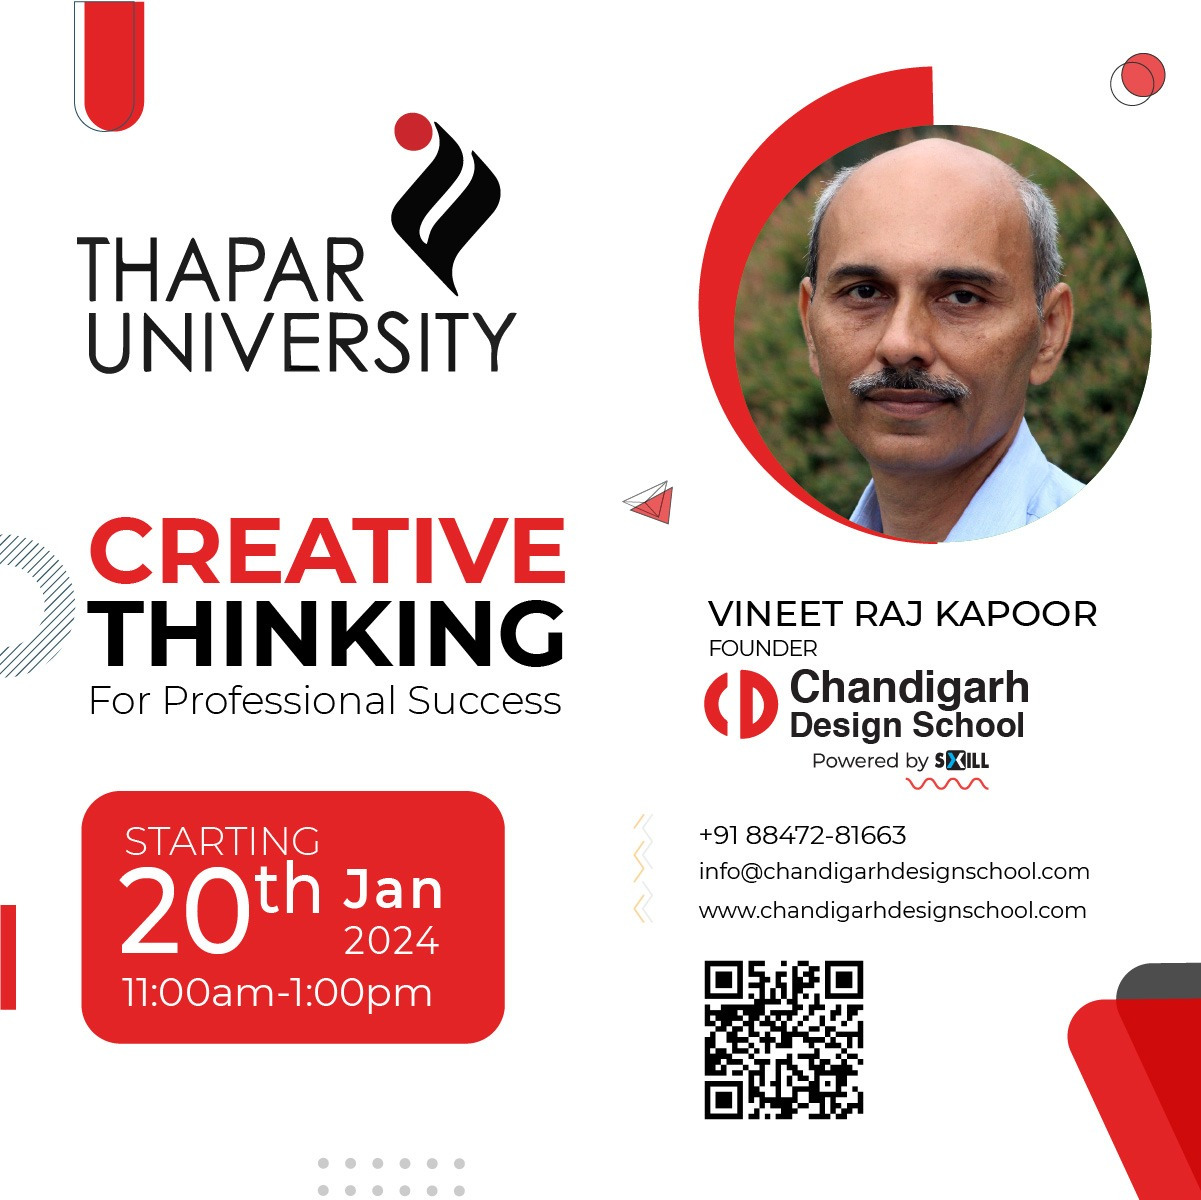 Chandigarh Design School has started a Creative Thinking course at Thapar University